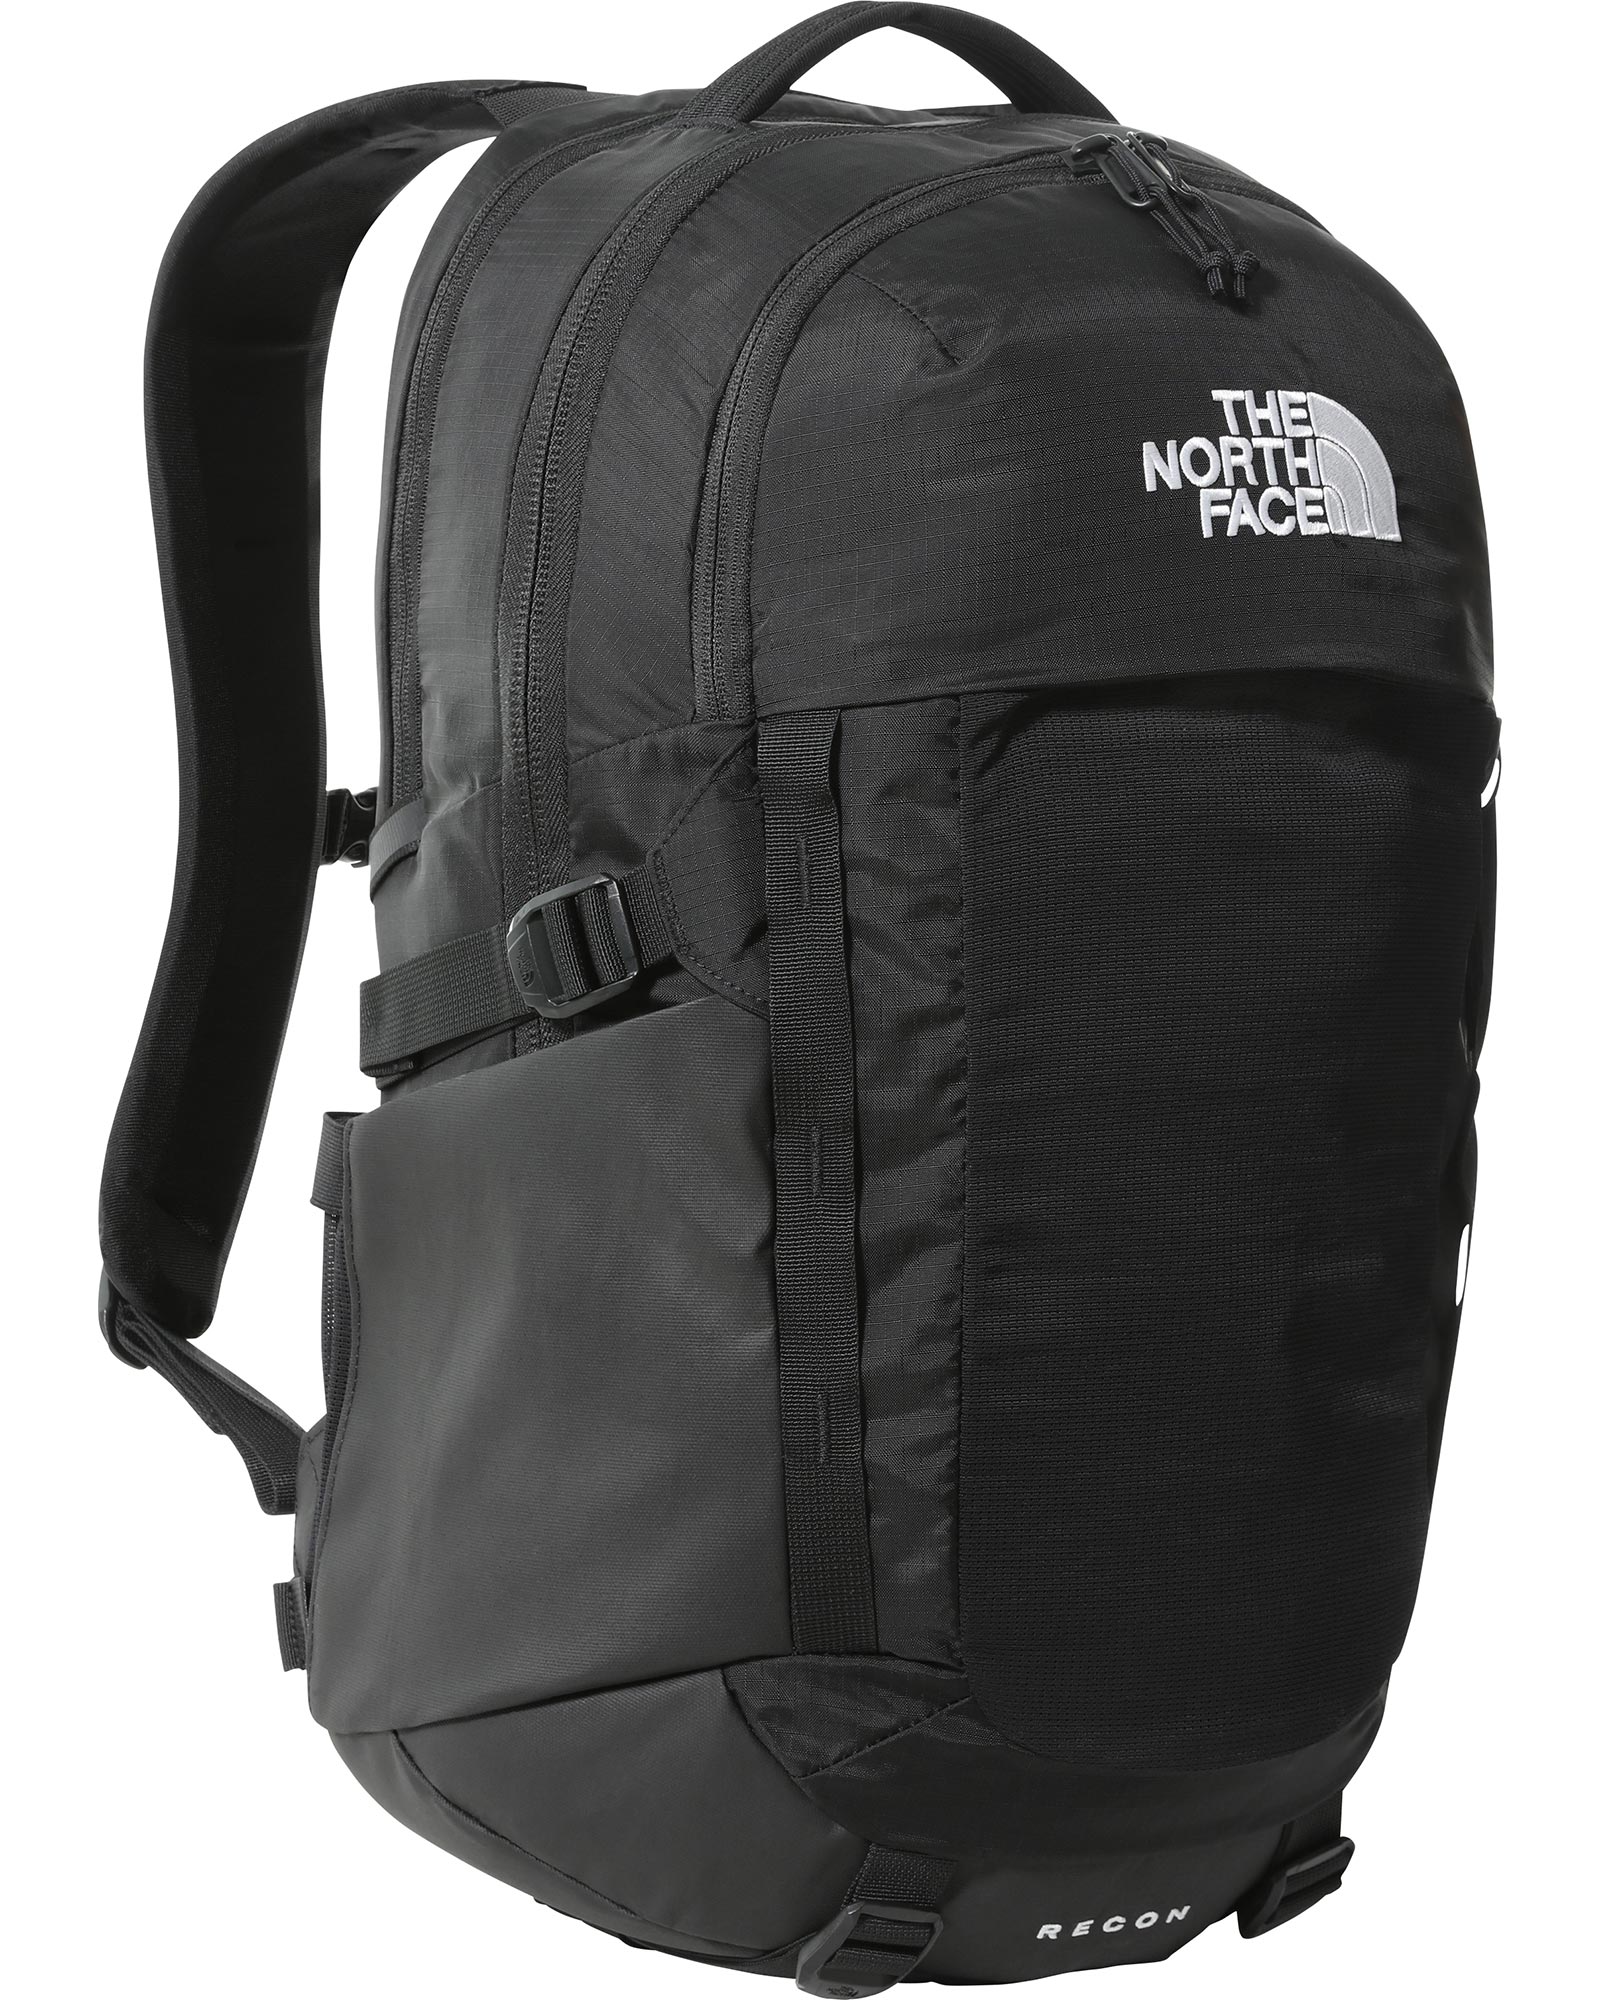 The North Face Recon Backpack Ellis Brigham Mountain Sports